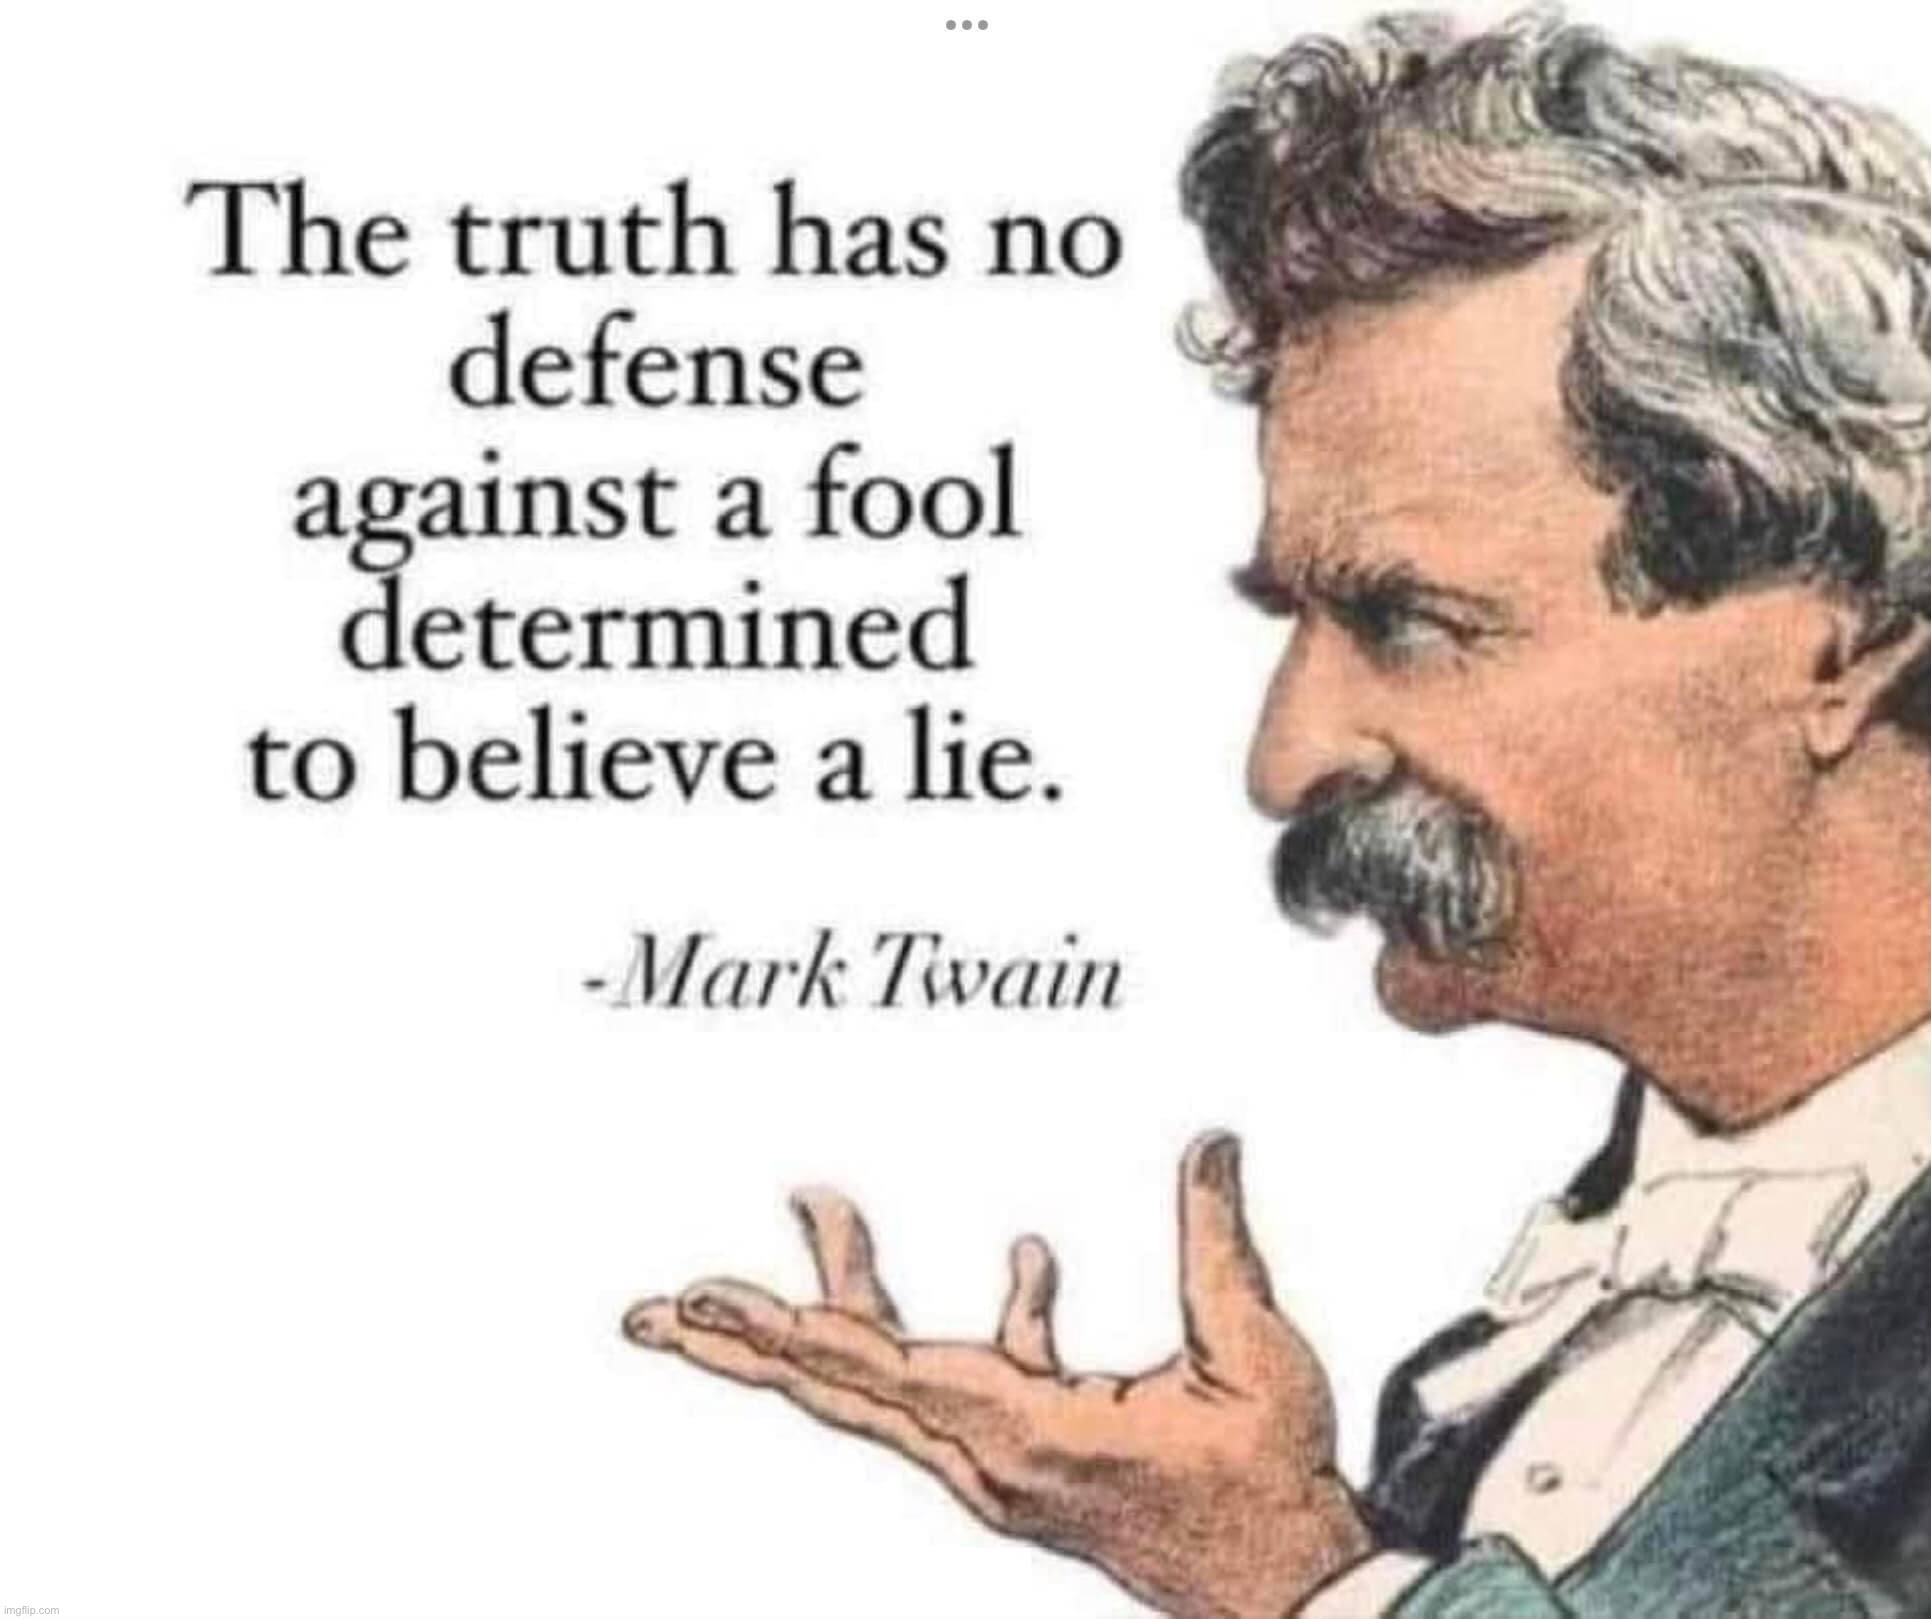 Mark Twain quote | image tagged in mark twain quote,mark twain,mark twain thought,words of wisdom,wisdom,inspirational quote | made w/ Imgflip meme maker